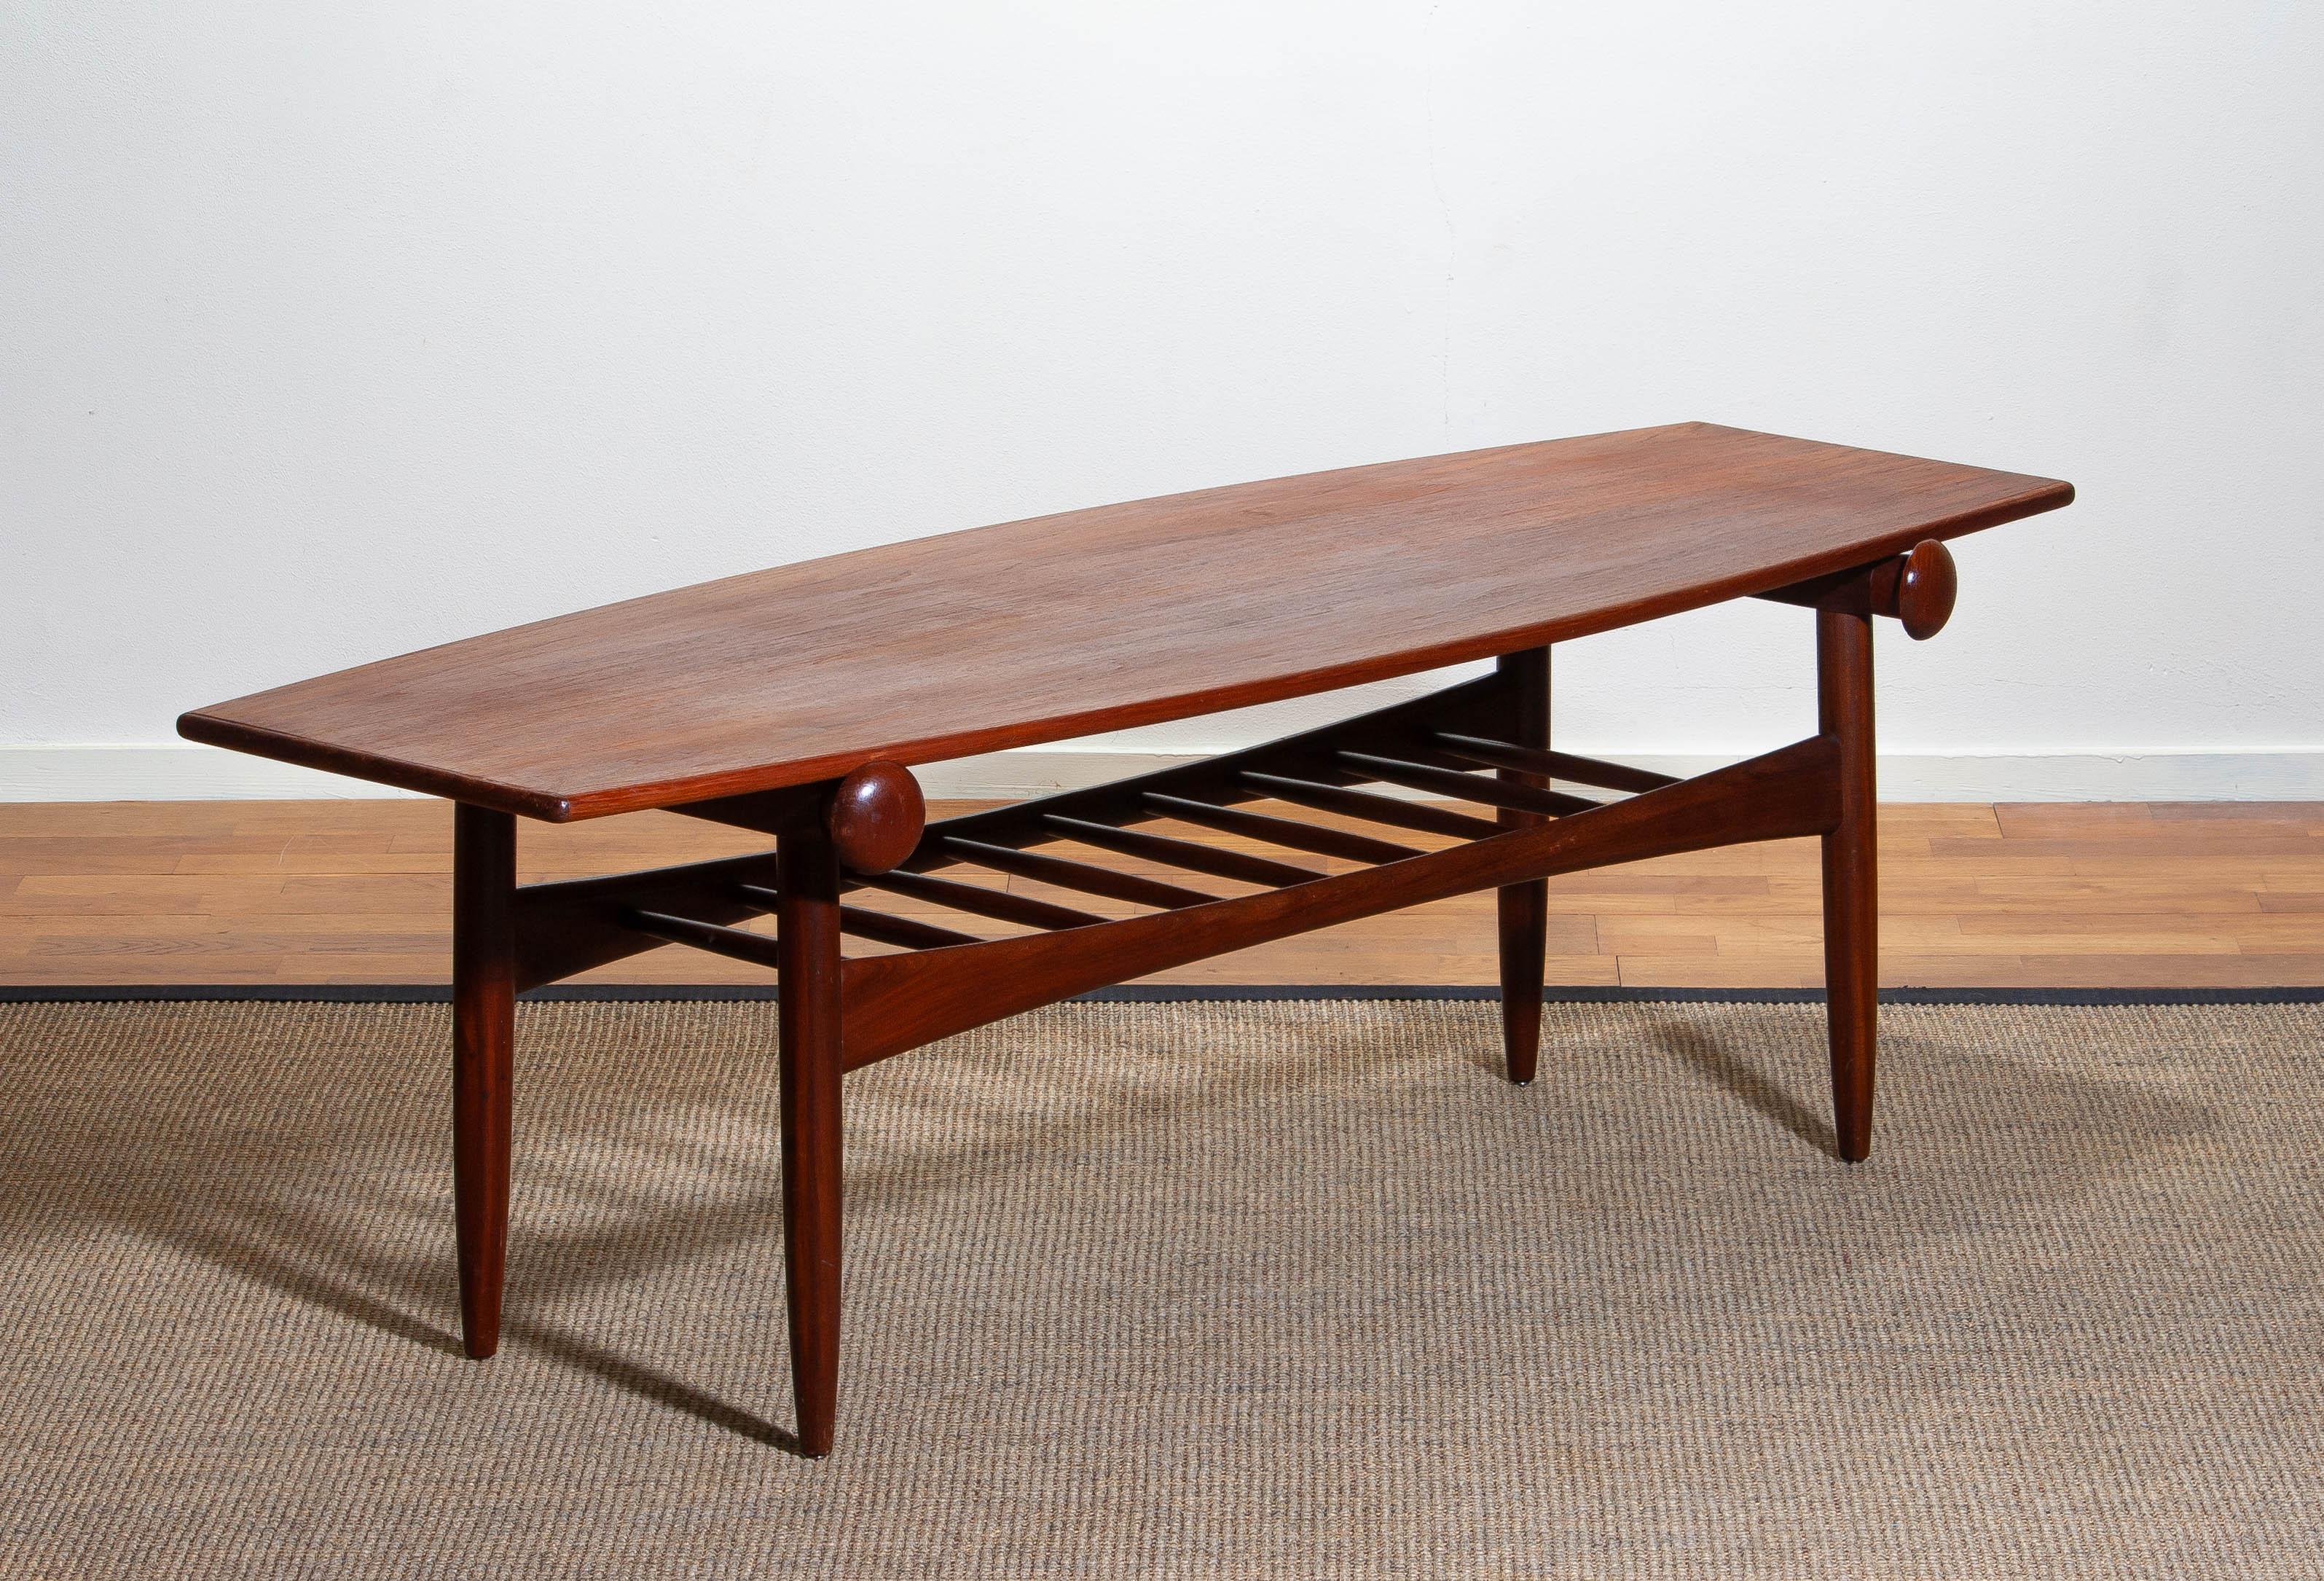 Beautiful Italian teak and walnut coffee table, 1960s.
The ellipse or surfboard shaped tabletop is reversible so you can choose the top
in white Formica or in teak.
The overall condition is good.